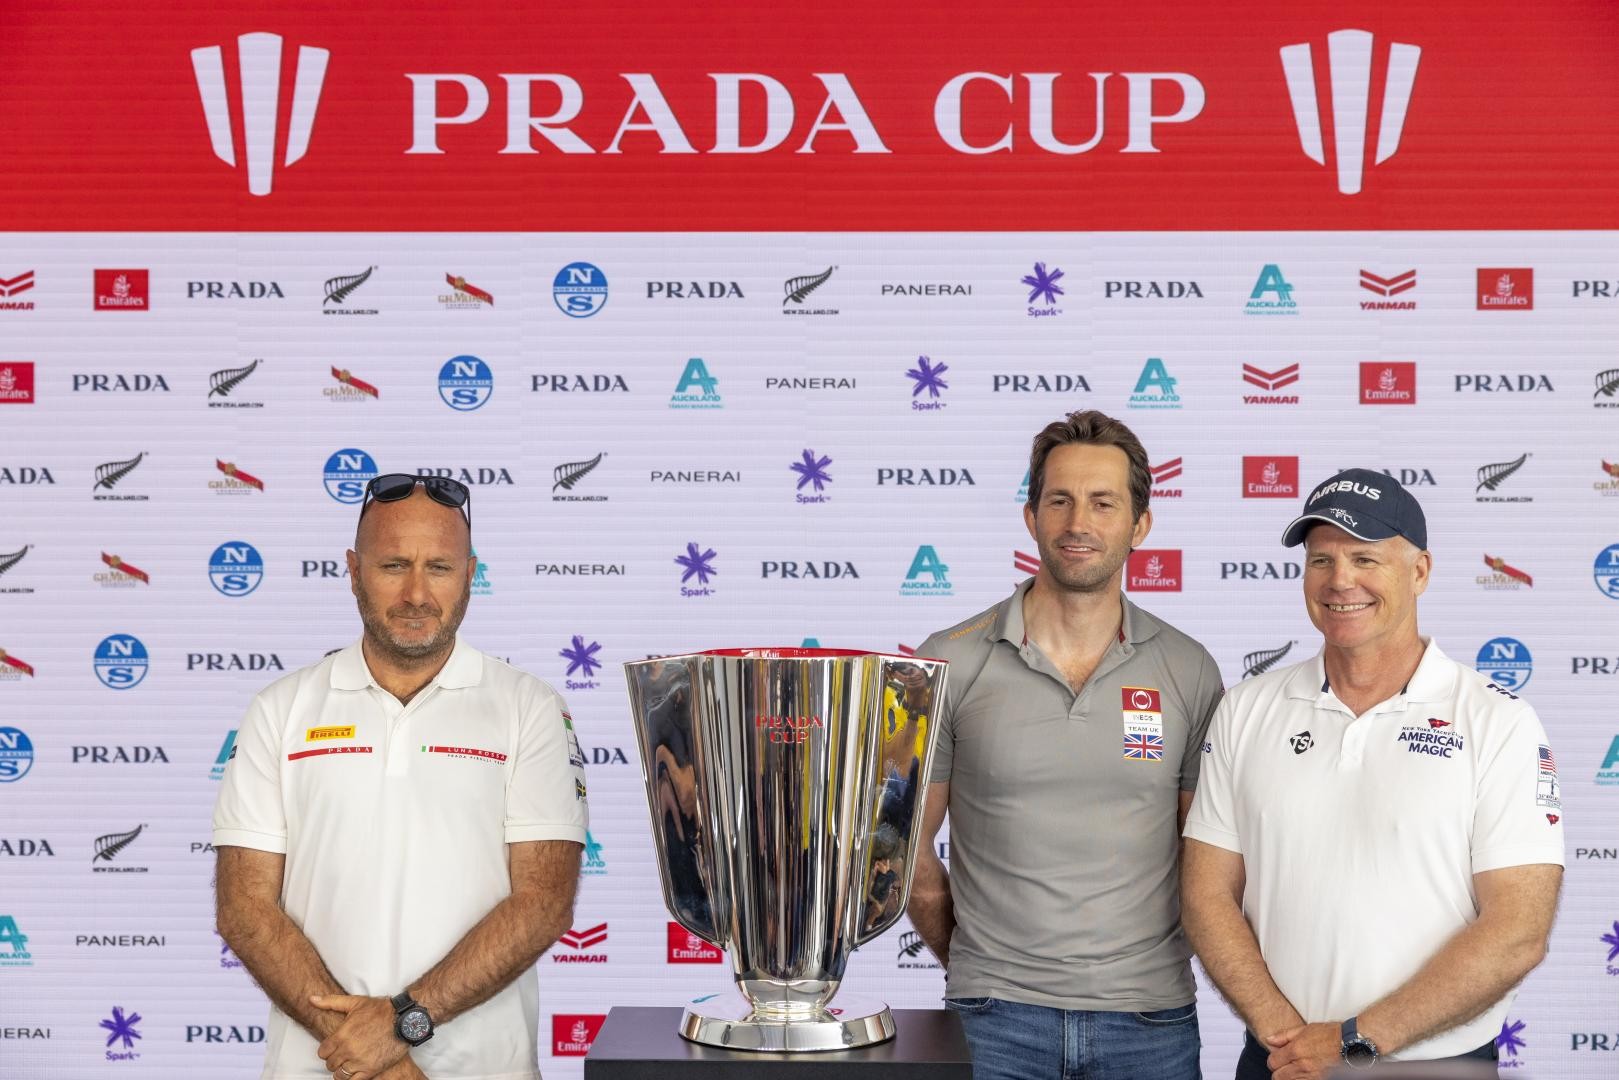 The three skippers and the Prada Cup: from left Max Sirena, Ben Ainslie, Terry Hutchinson